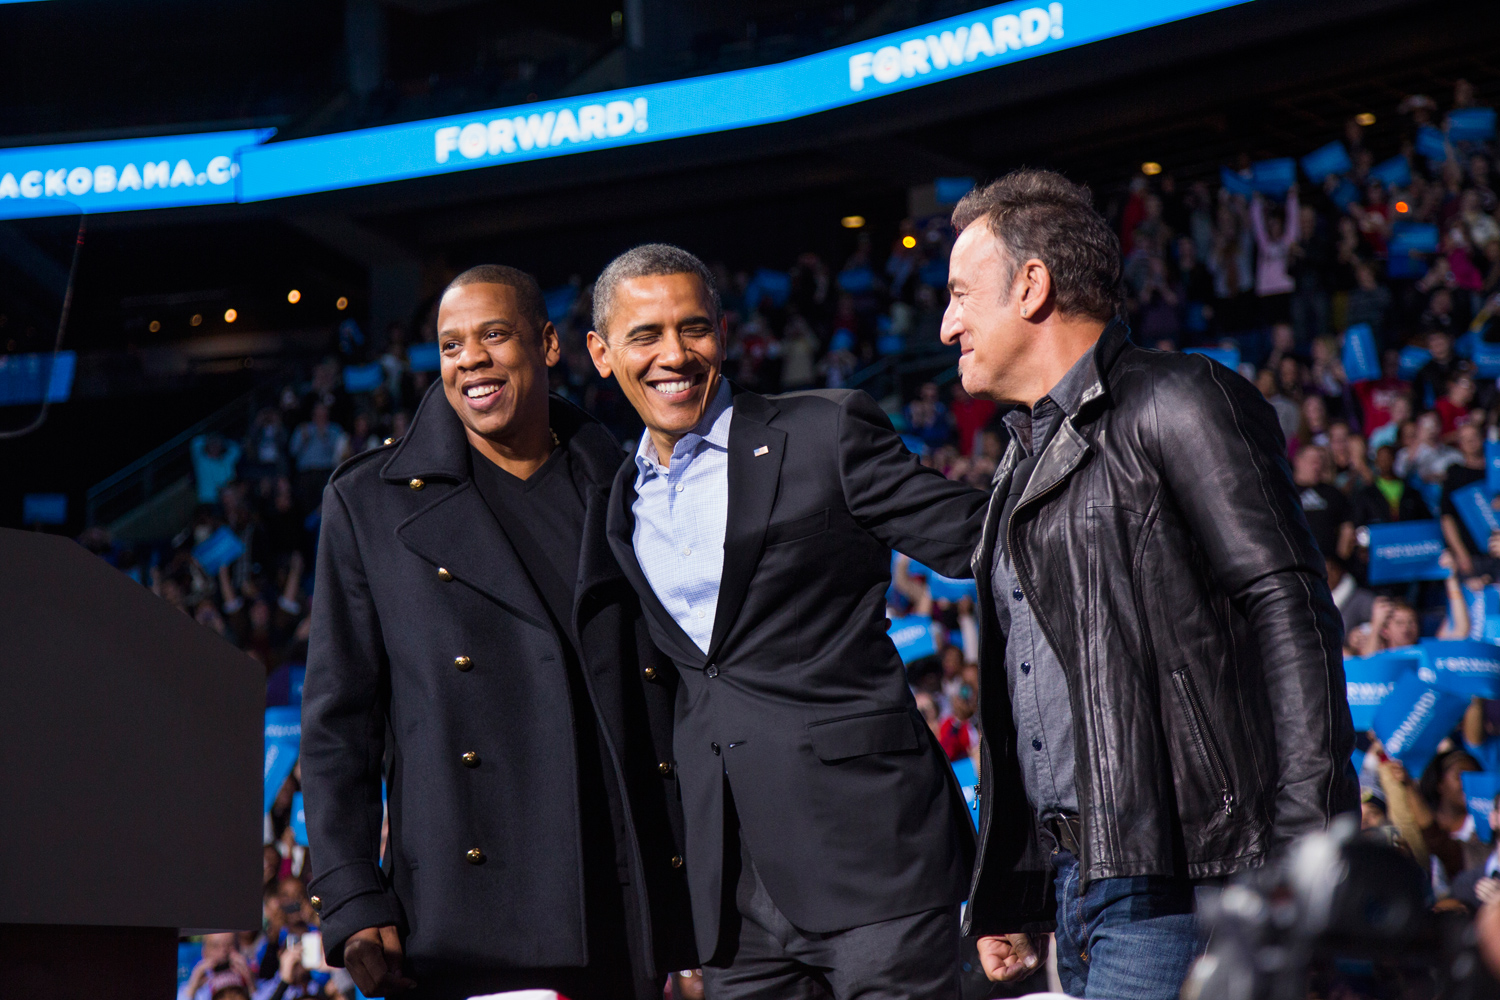 Image: Nov. 5, 2012. President Barack Obama stands on stage with rapper Jay-Z and musician Bruce Springsteen at an election campaign rally in Columbus, Ohio.